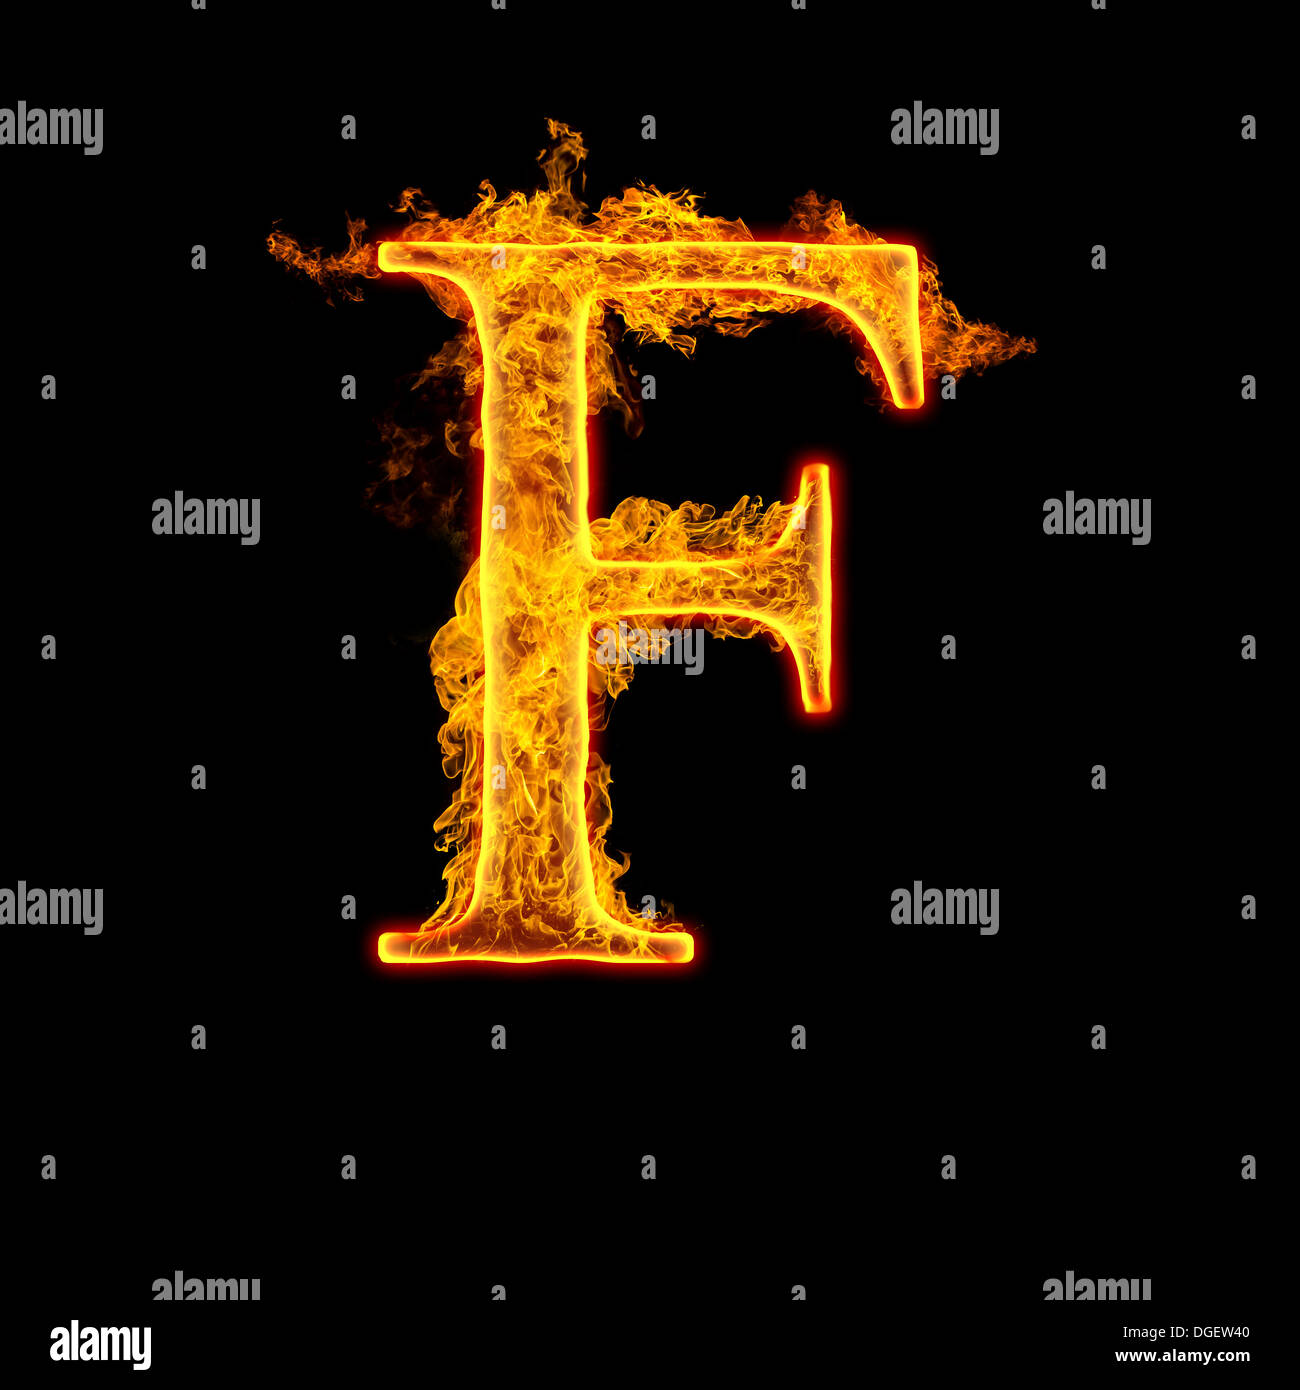 Collection of Amazing f Letter Images in Full 4K Resolution – Over 999 Top Picks